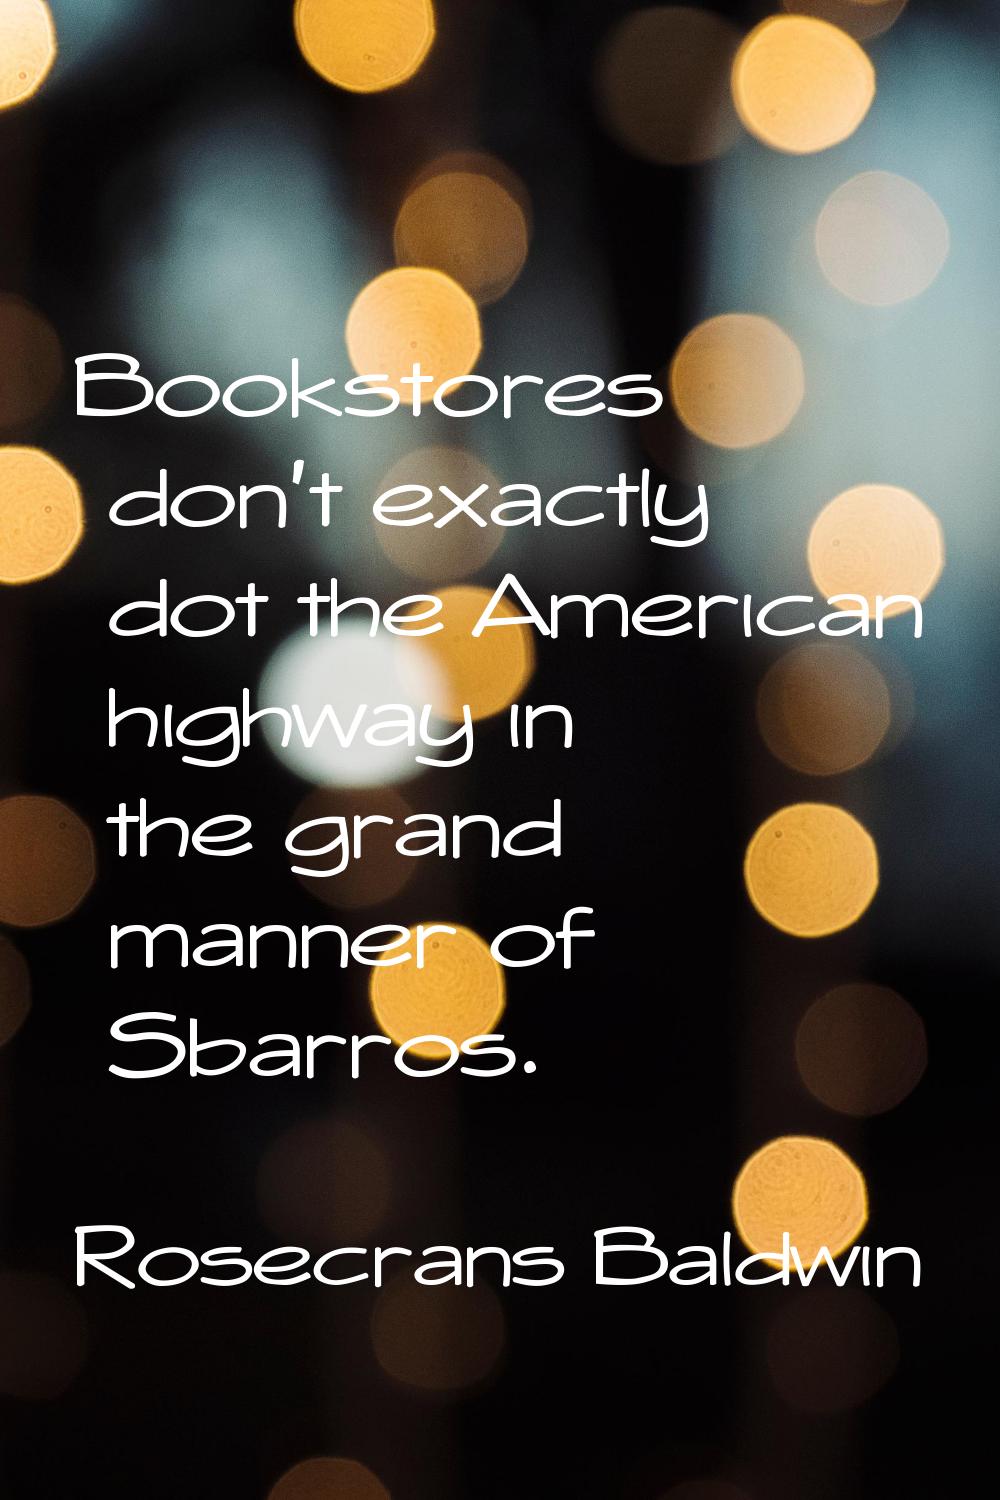 Bookstores don't exactly dot the American highway in the grand manner of Sbarros.